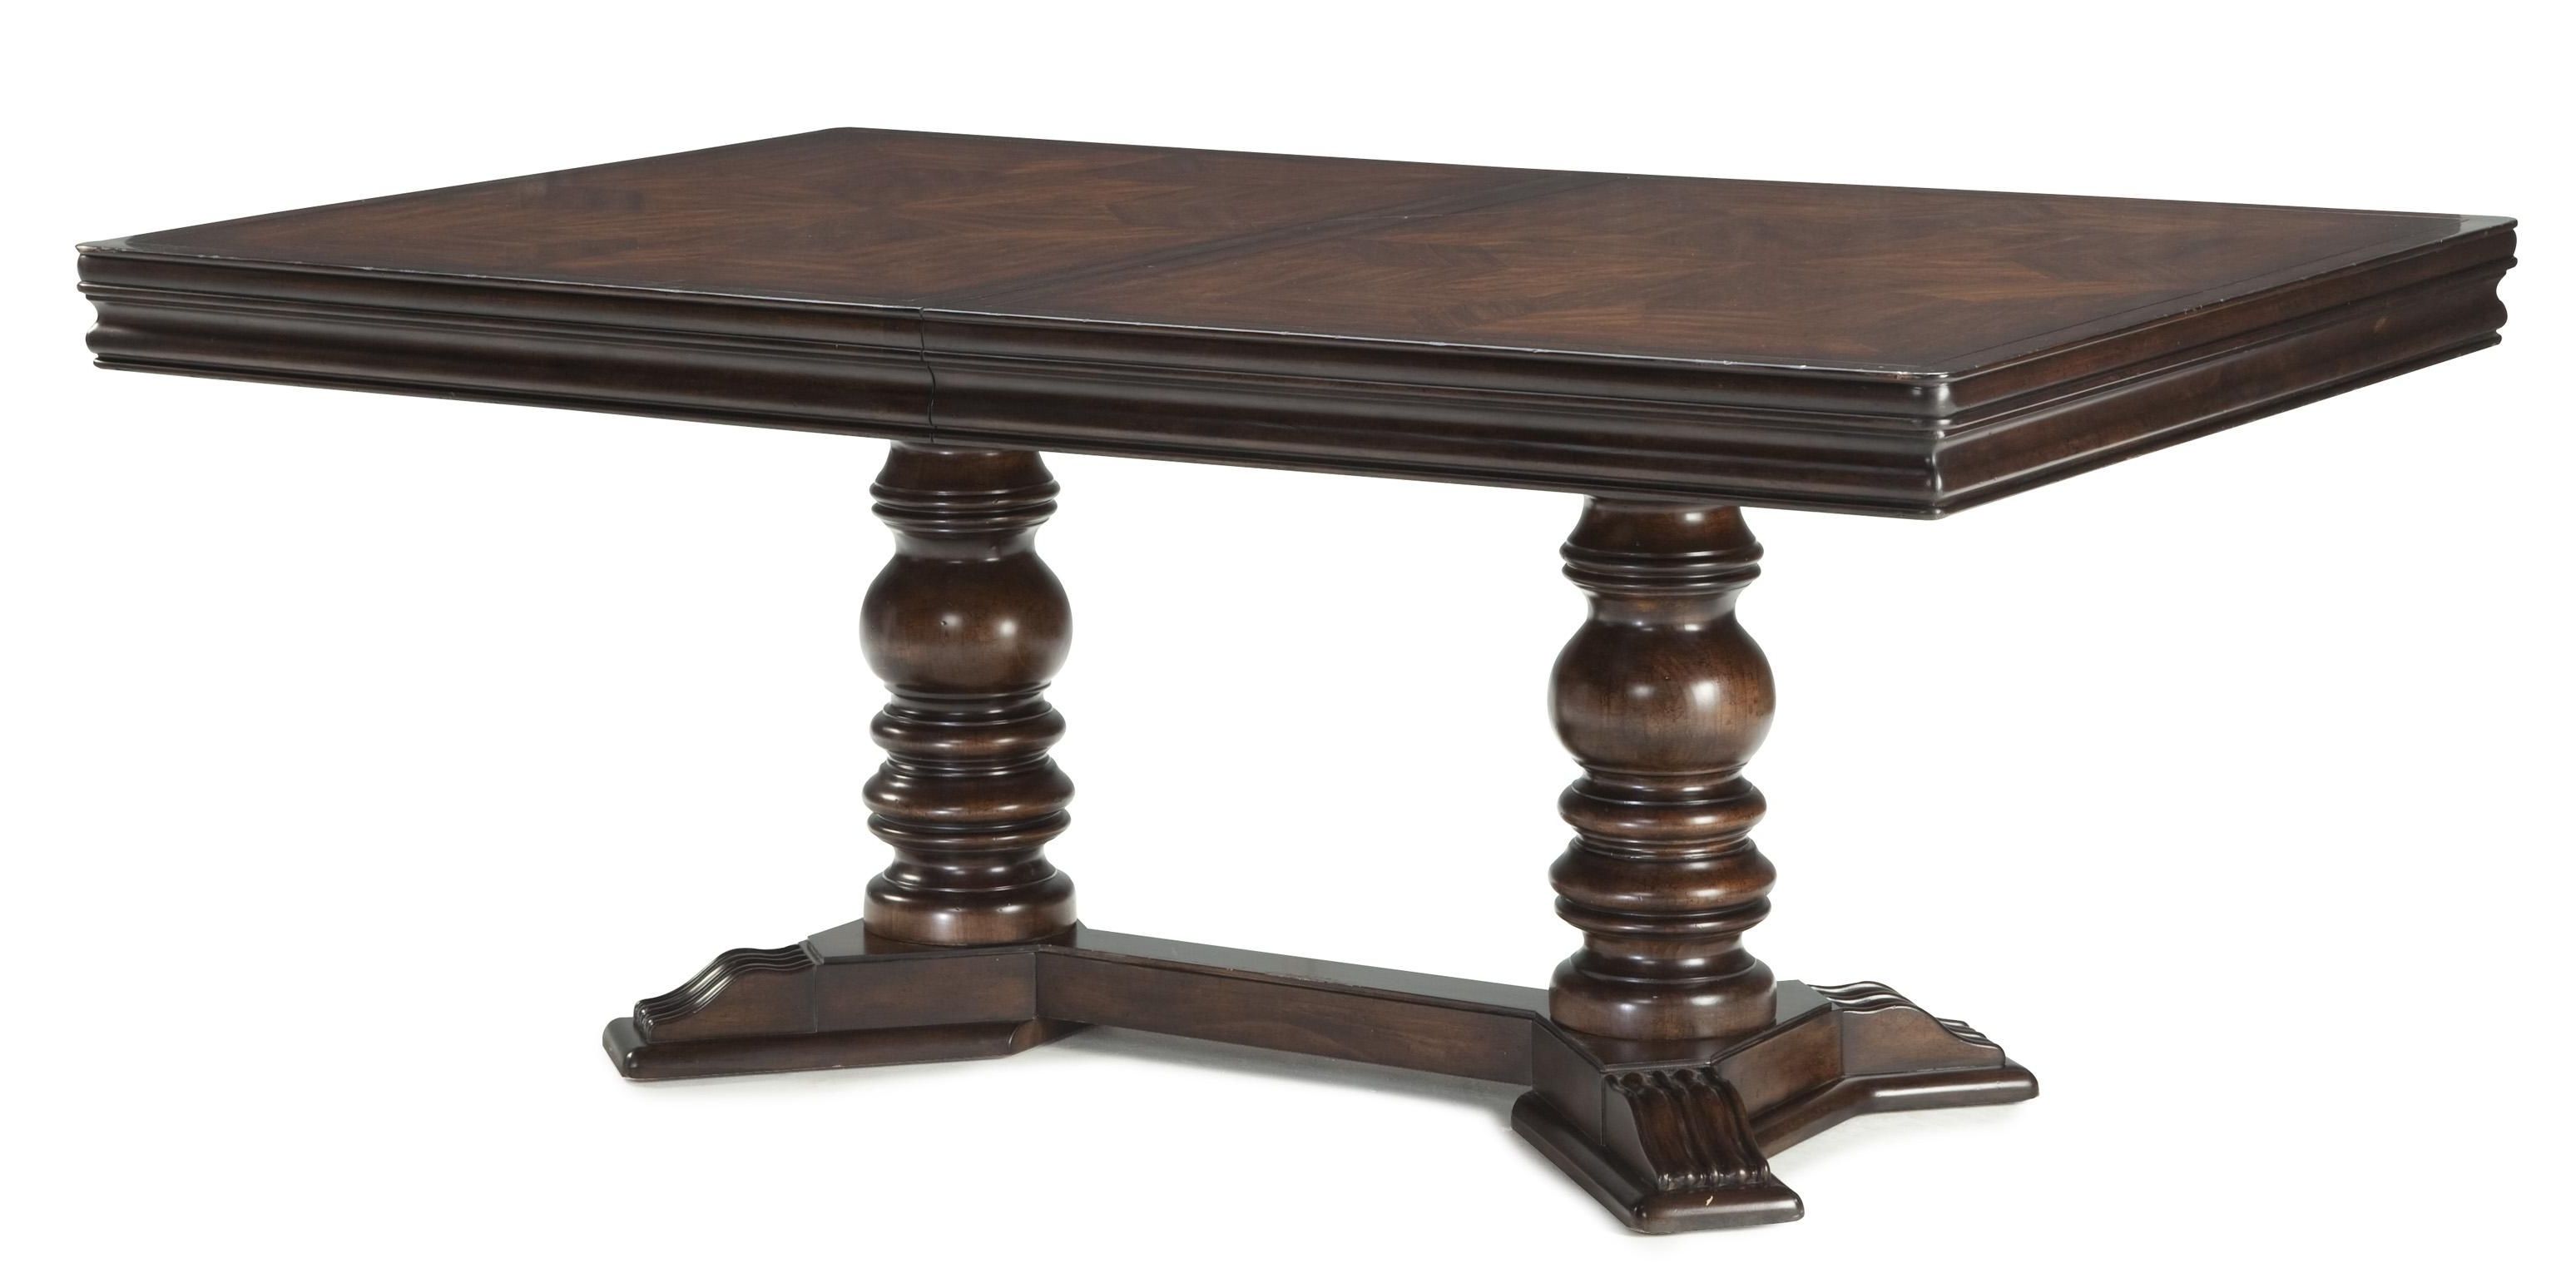 Legacy Classic Havana Rectangular Double Pedestal Dining Room Table Within Most Up To Date Havana Dining Tables (View 18 of 25)